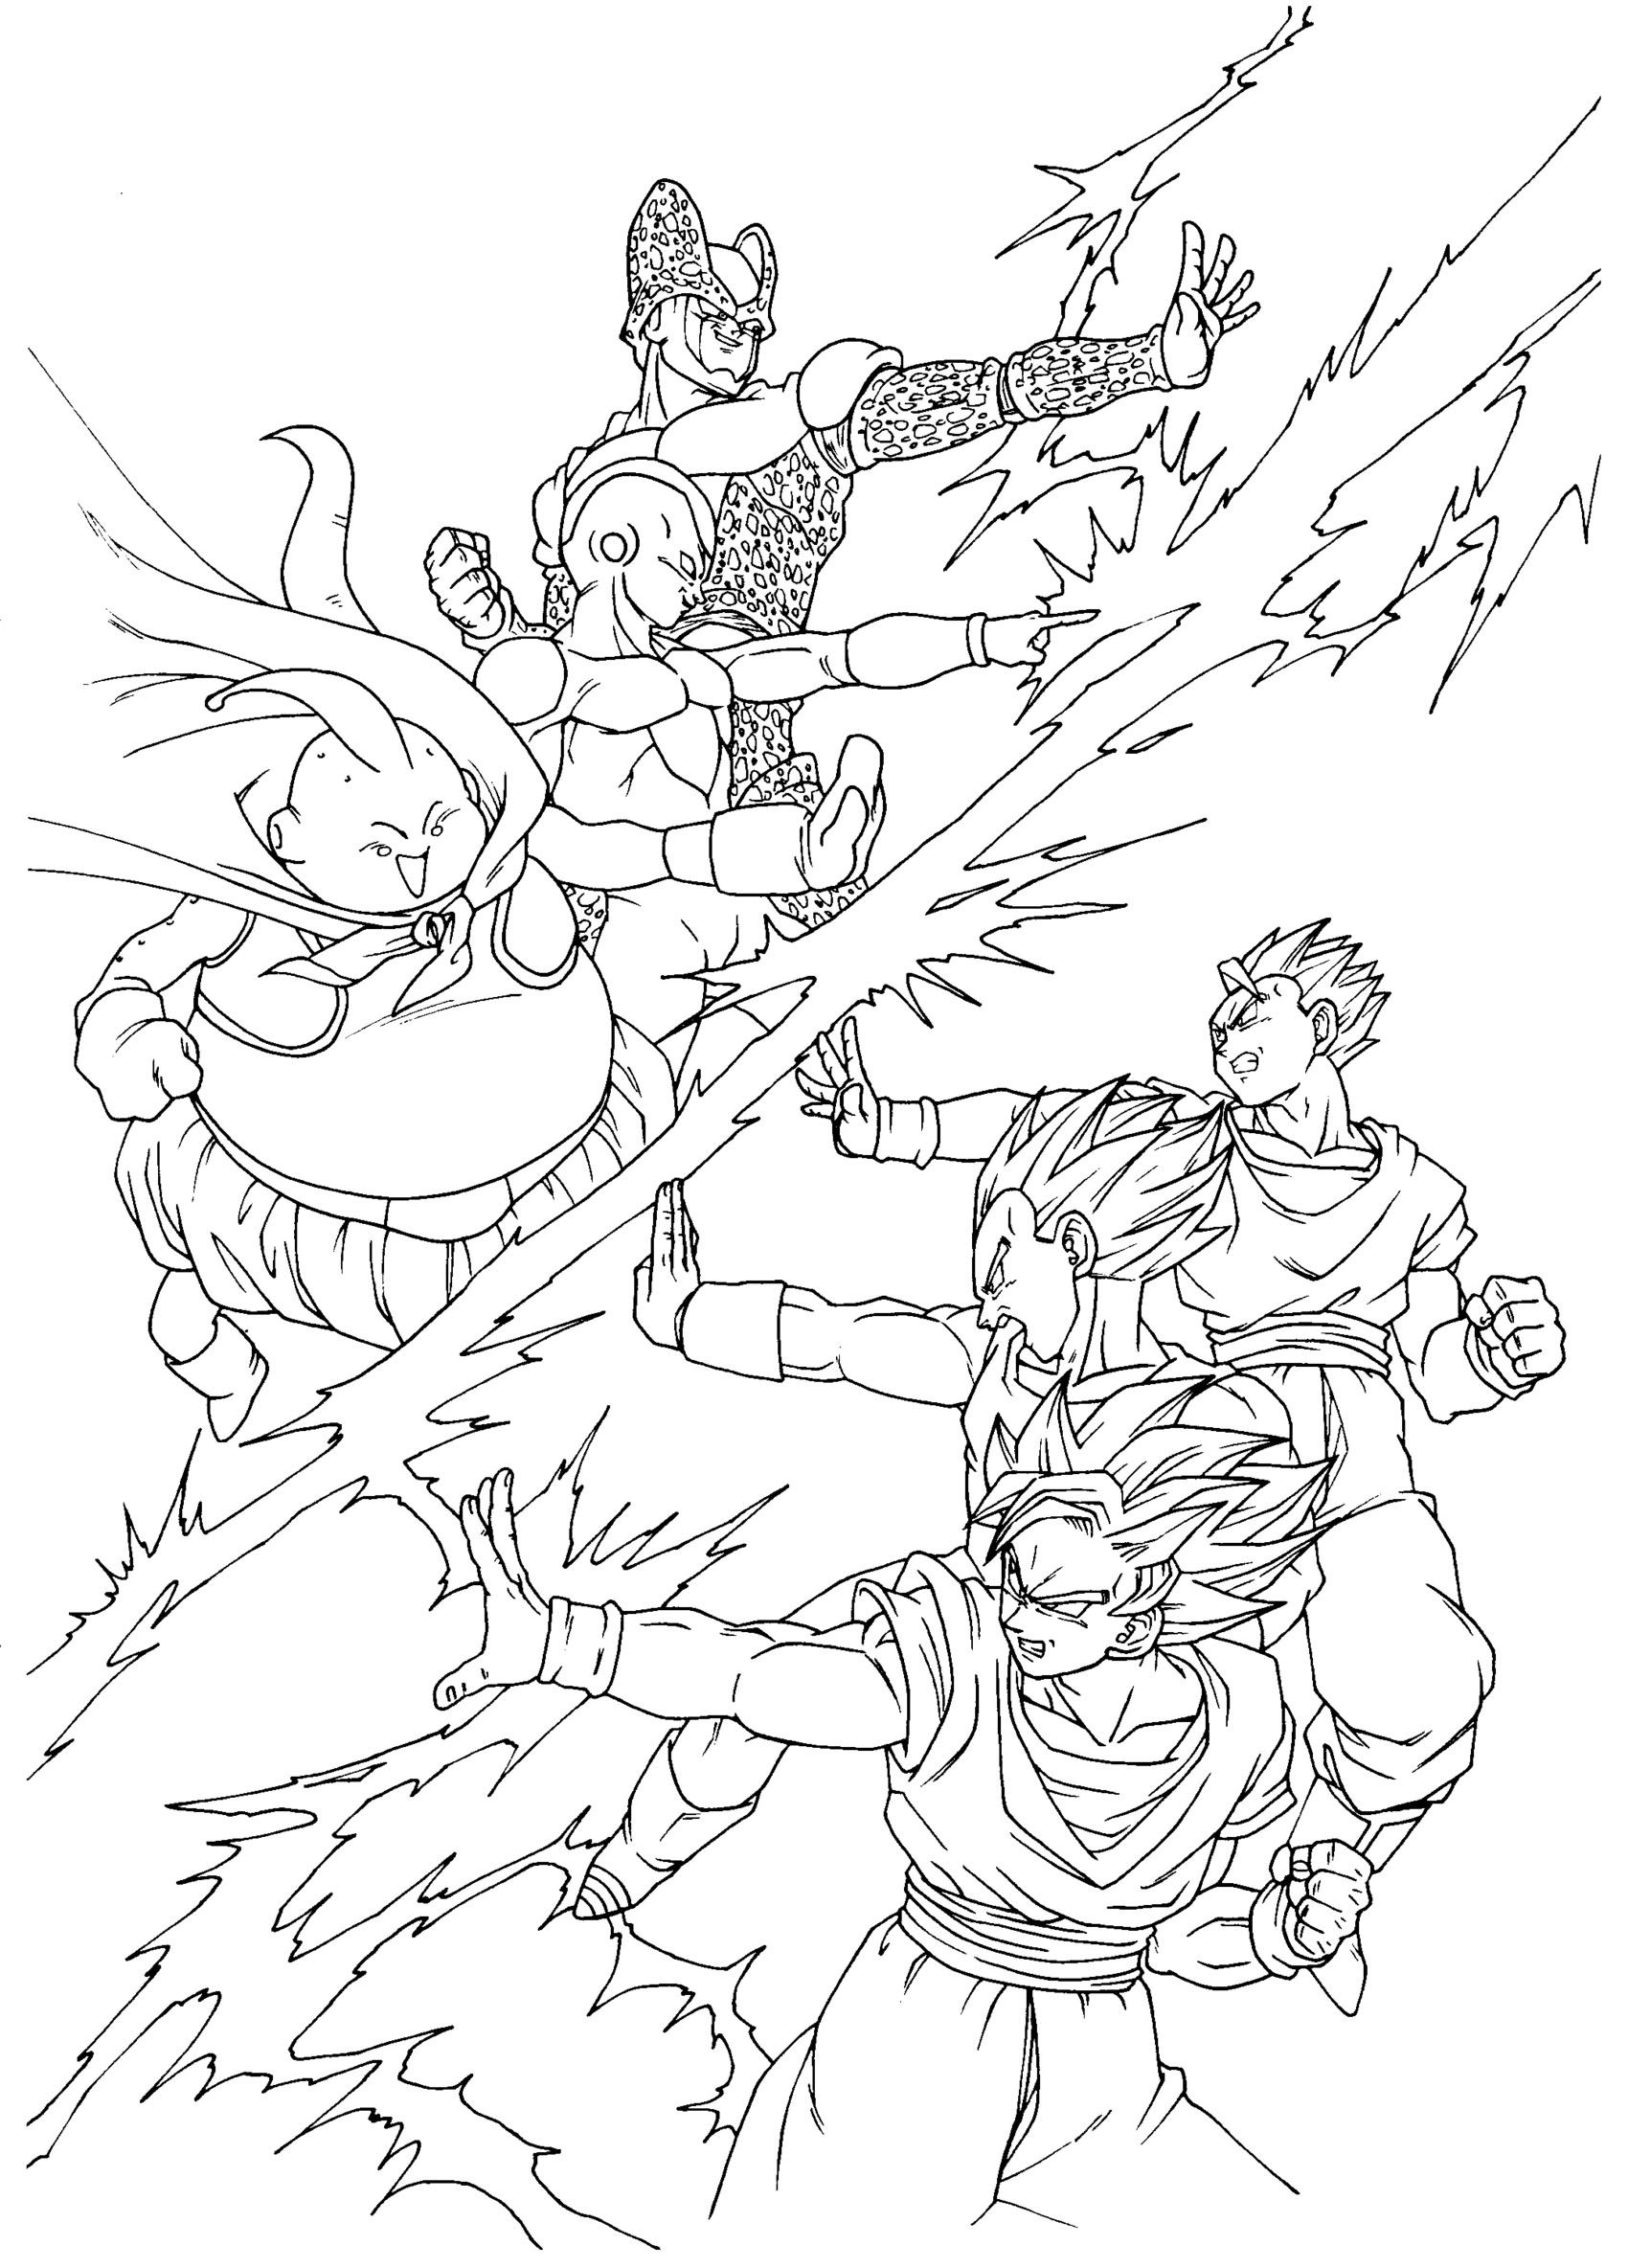 songoku vegeta songohan against cell boo and freezer dragon ball z kids coloring pages